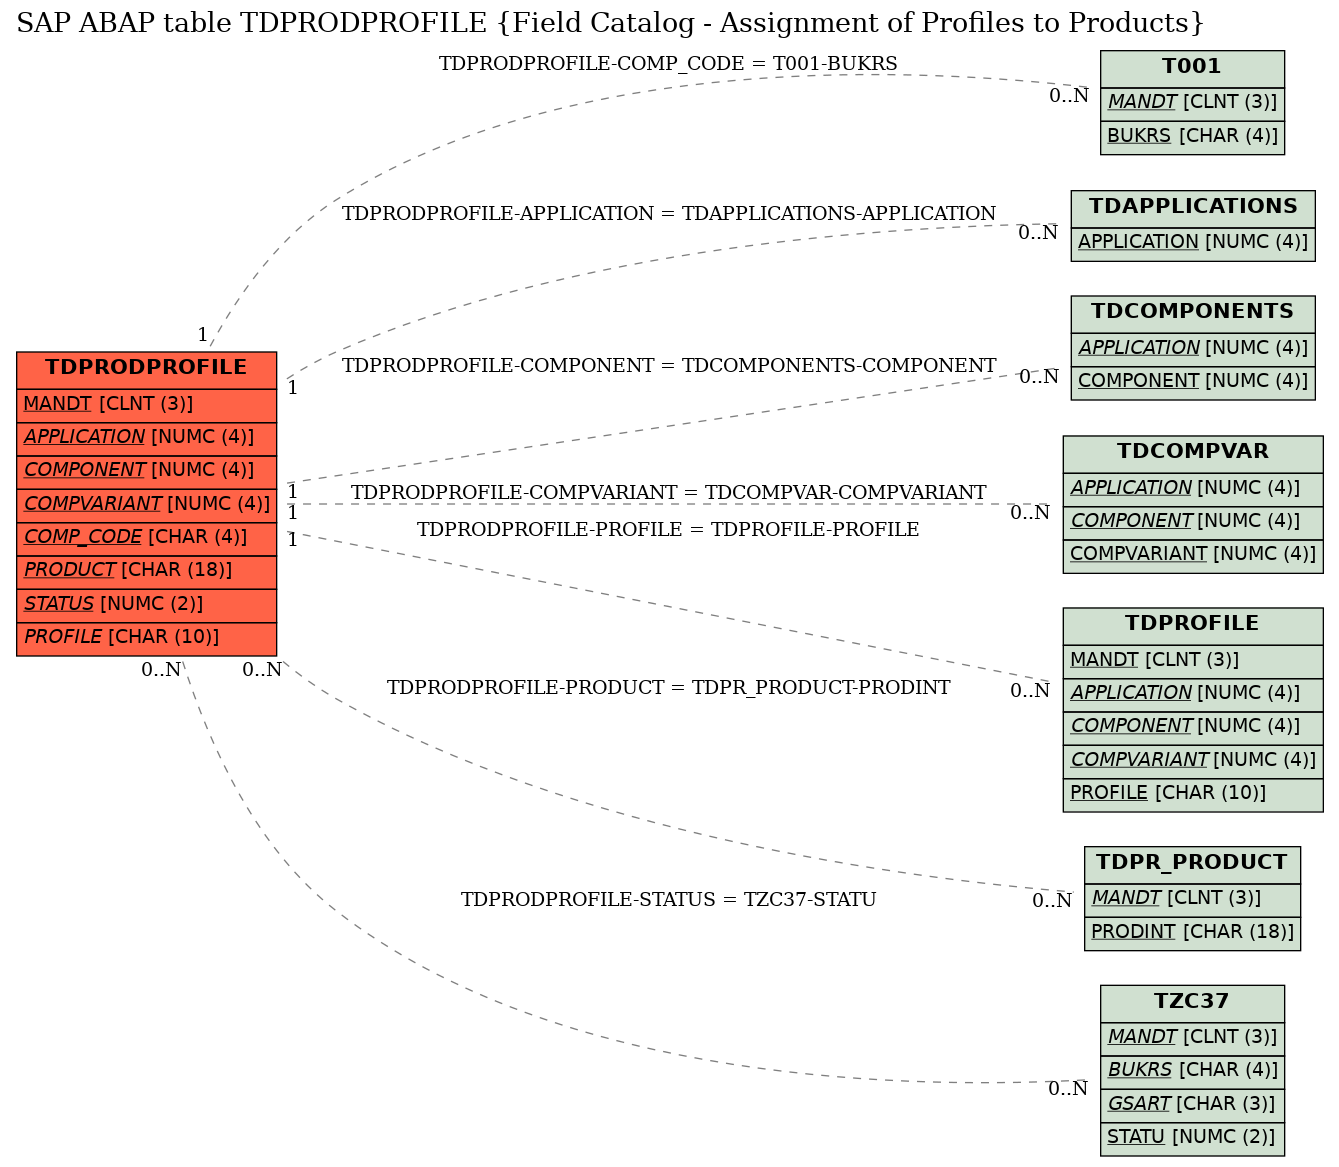 E-R Diagram for table TDPRODPROFILE (Field Catalog - Assignment of Profiles to Products)